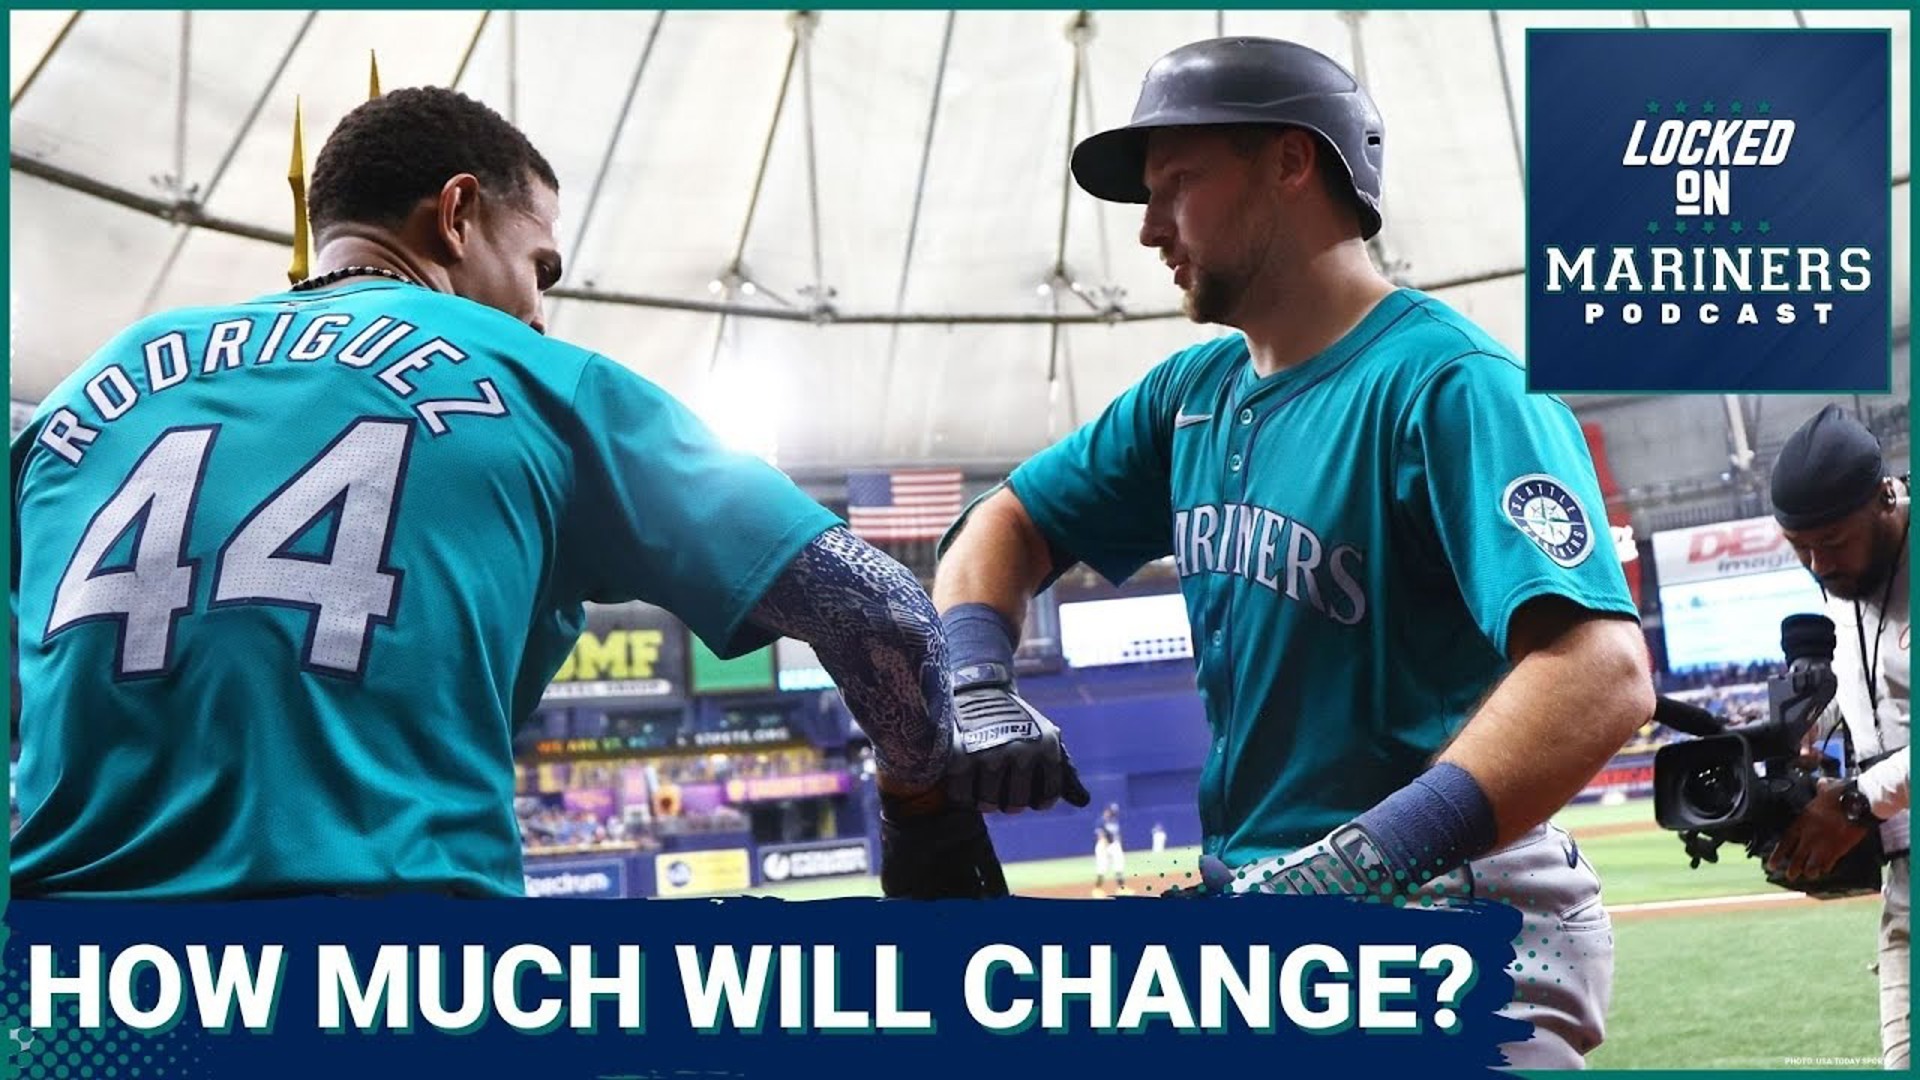 Ty and Colby are joined by Ben Ranieri of Sea Level to discuss if the issues the Mariners are currently experiencing are a bump in the road.